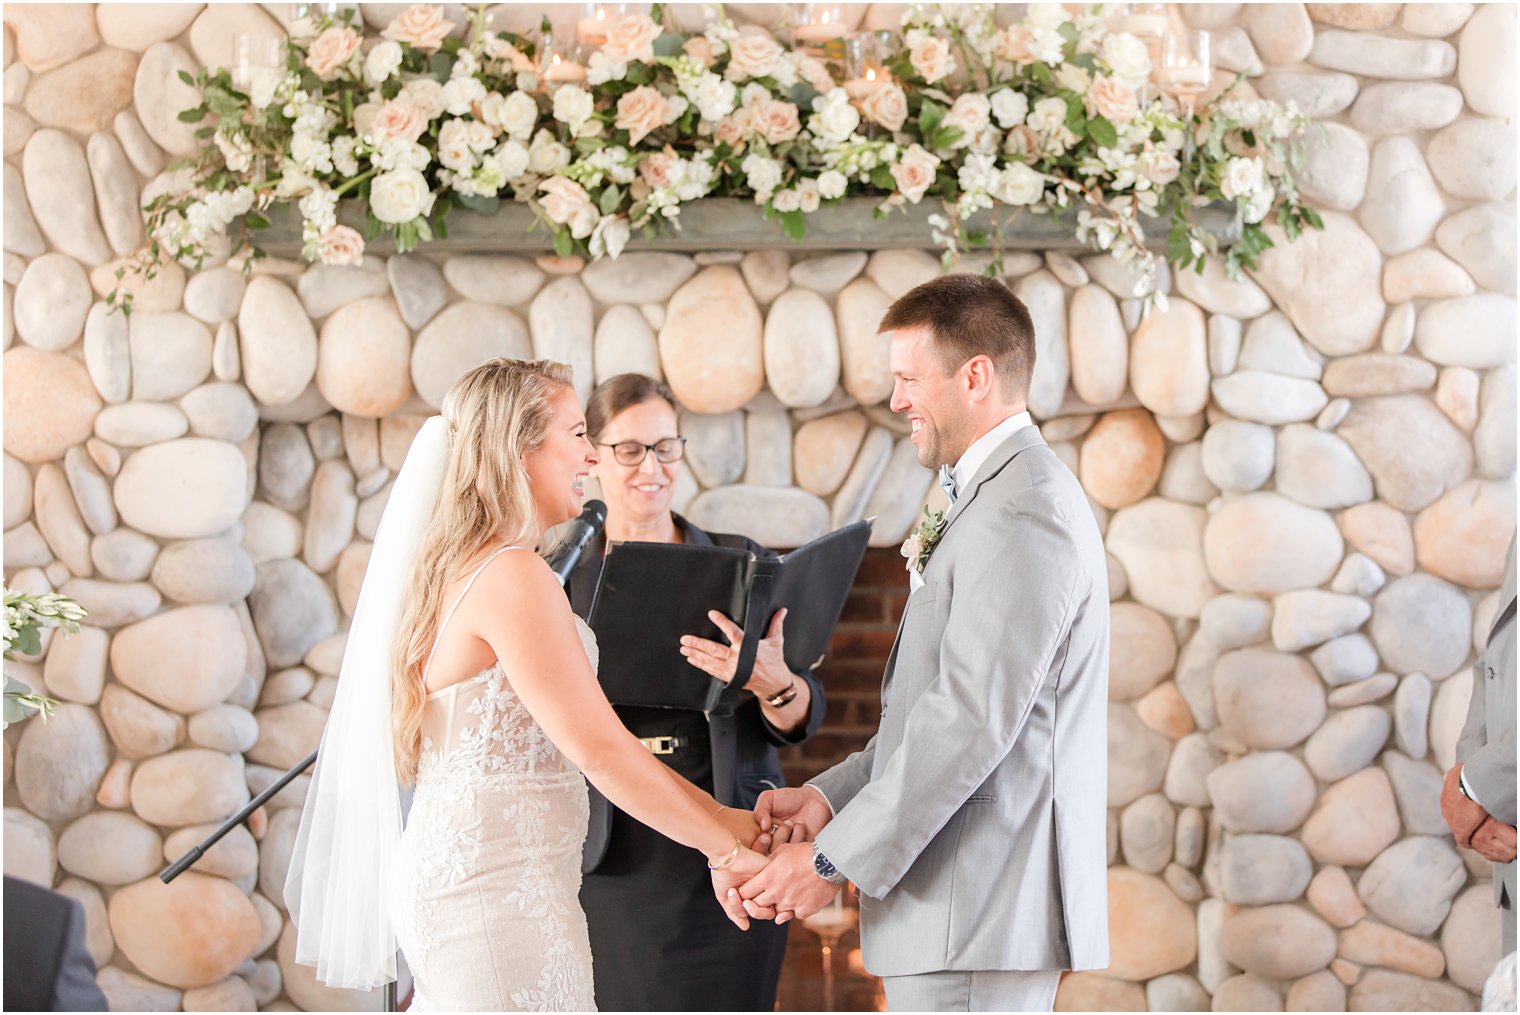 newlyweds hold hands and exchange vows by stone fireplace at wedding ceremony in Manahawkin NJ